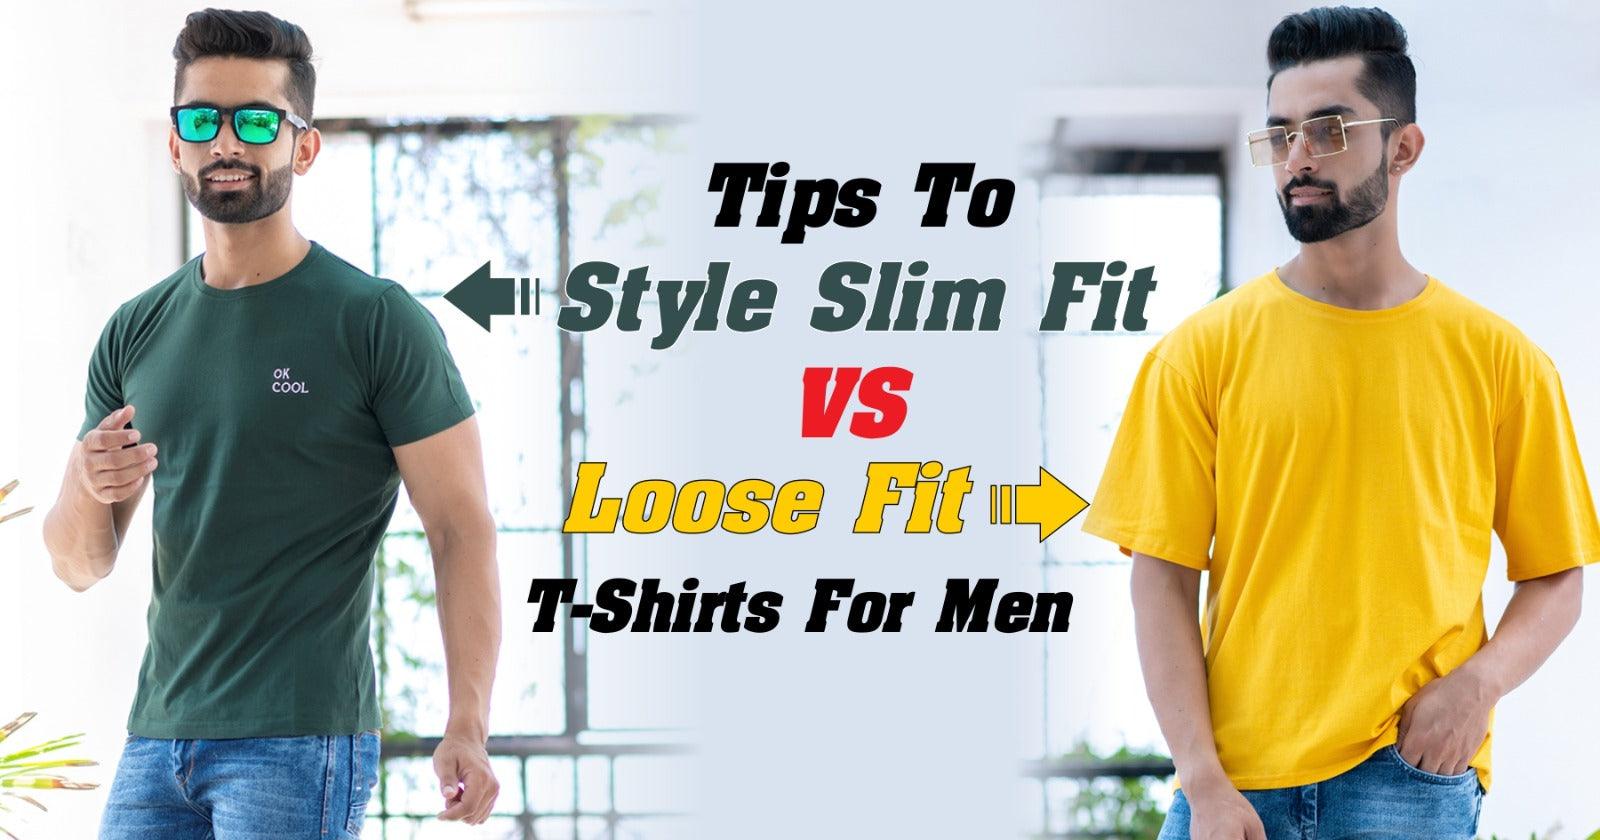 Tip to style slim fit vs loose fit t-shirts for men